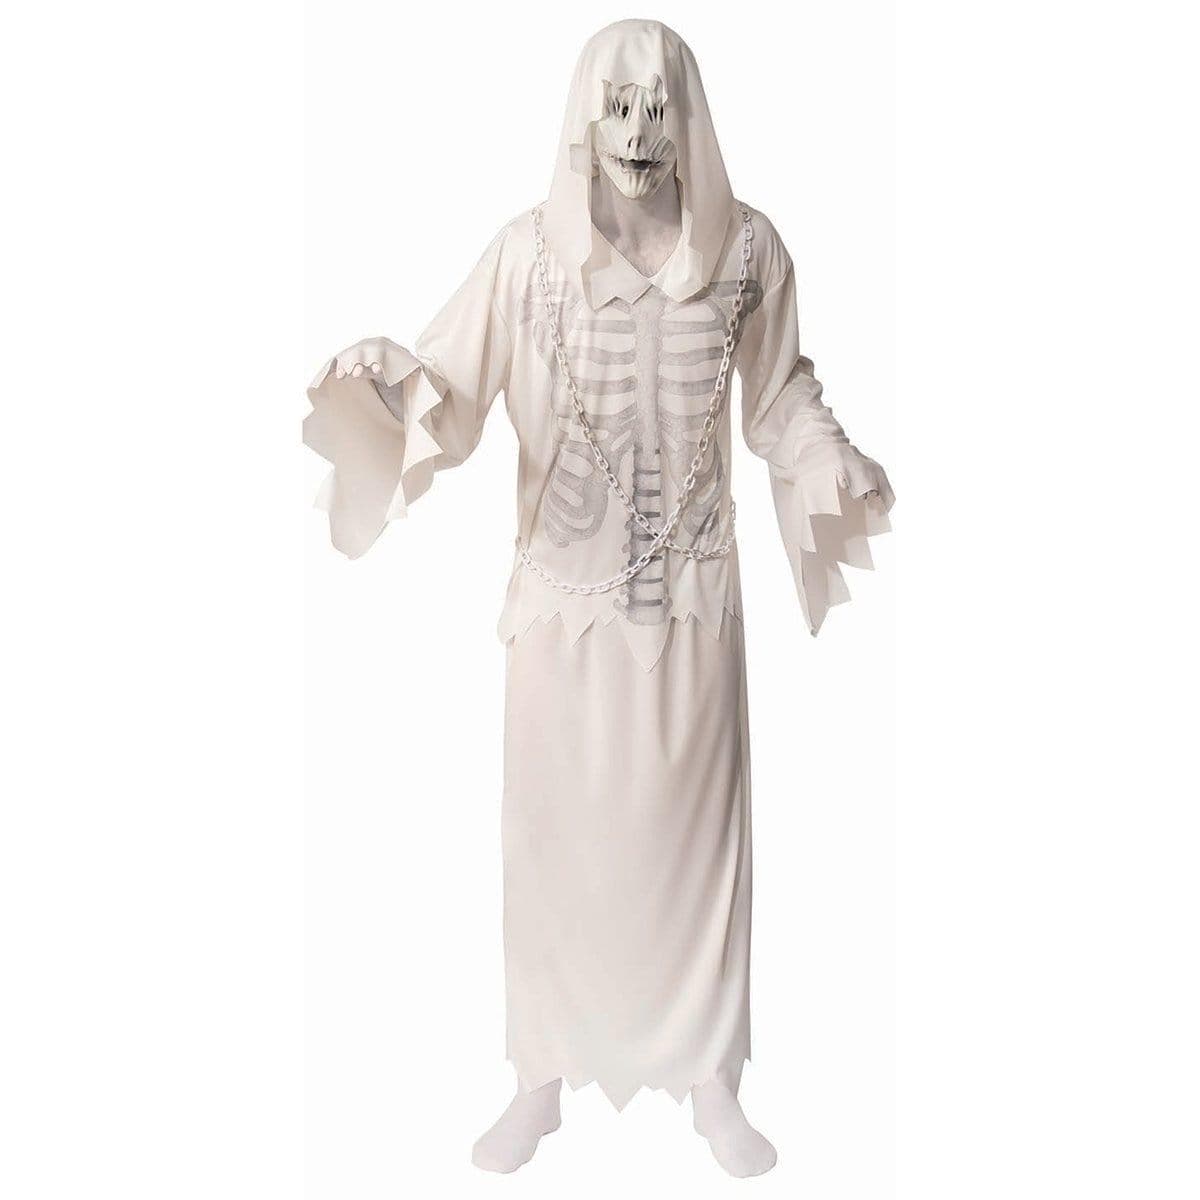 Hooded Ghost Costume for Adults, White Robe